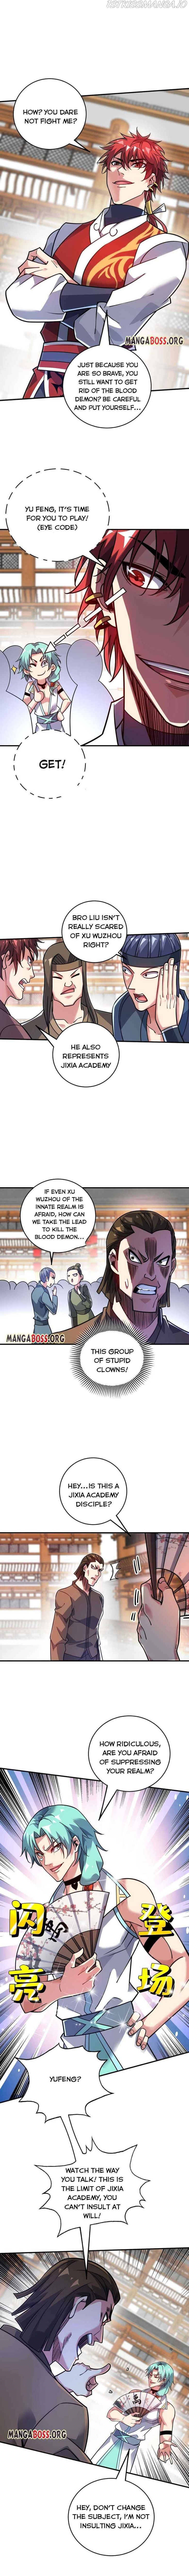 The First Son-In-Law Vanguard of All Time Chapter 162 - Page 1